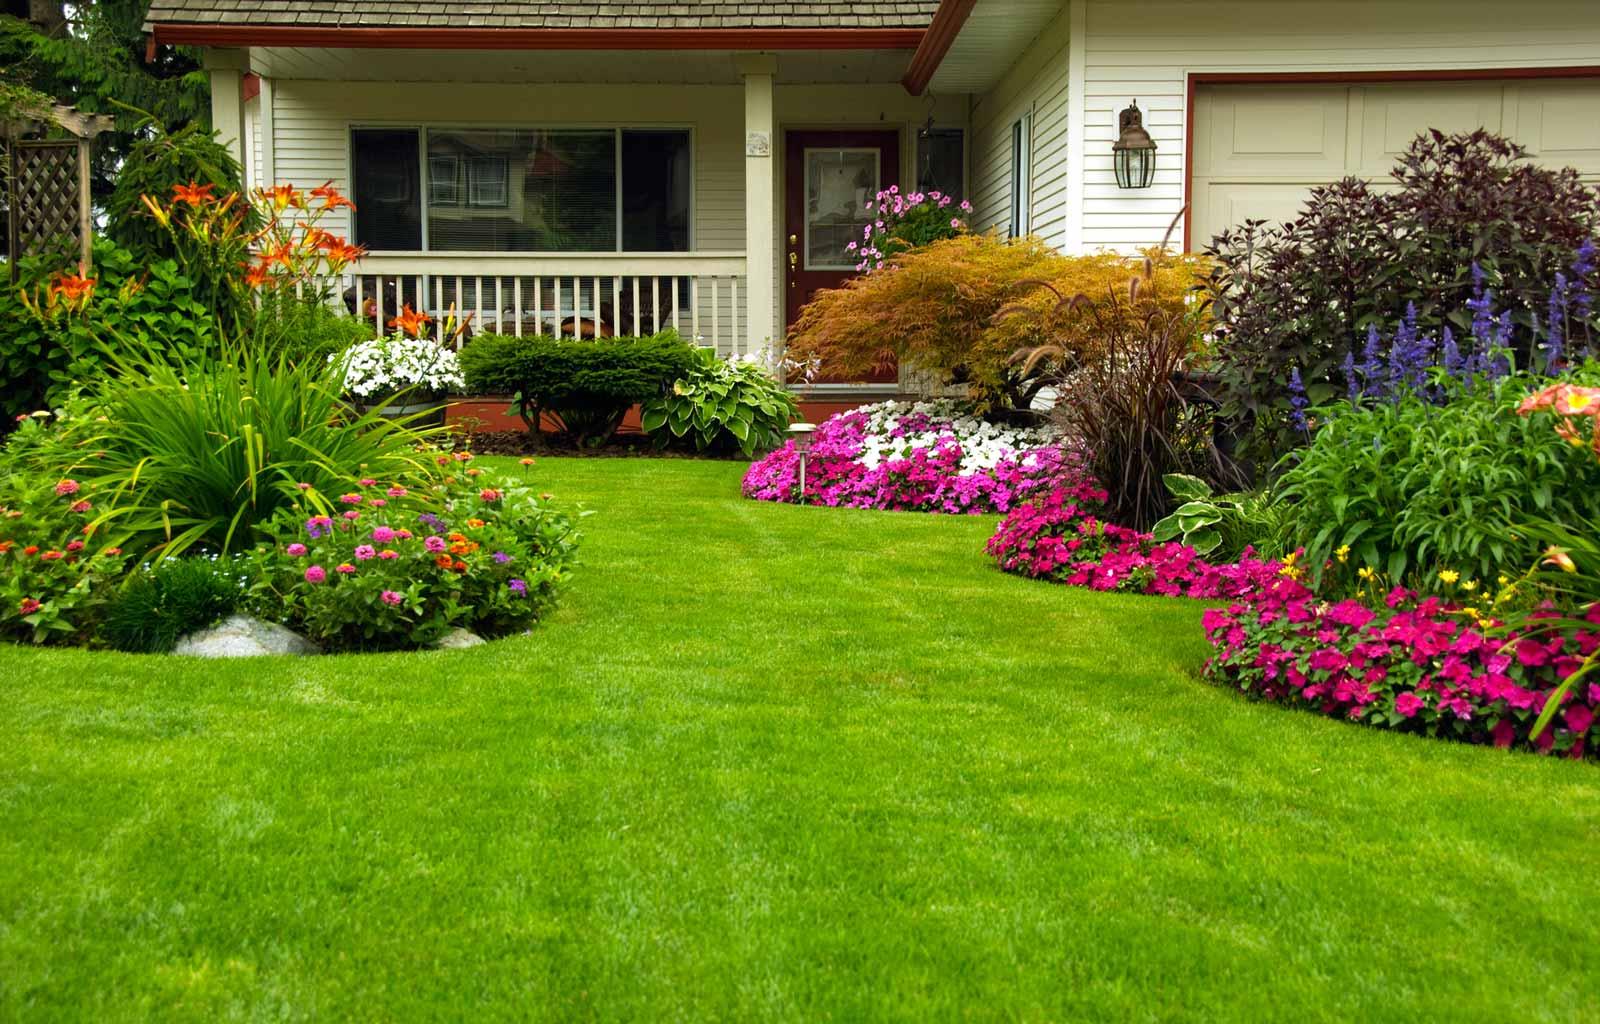 Professional Lawn Maintenance Services to Enhance Curb Appeal in Melbourne